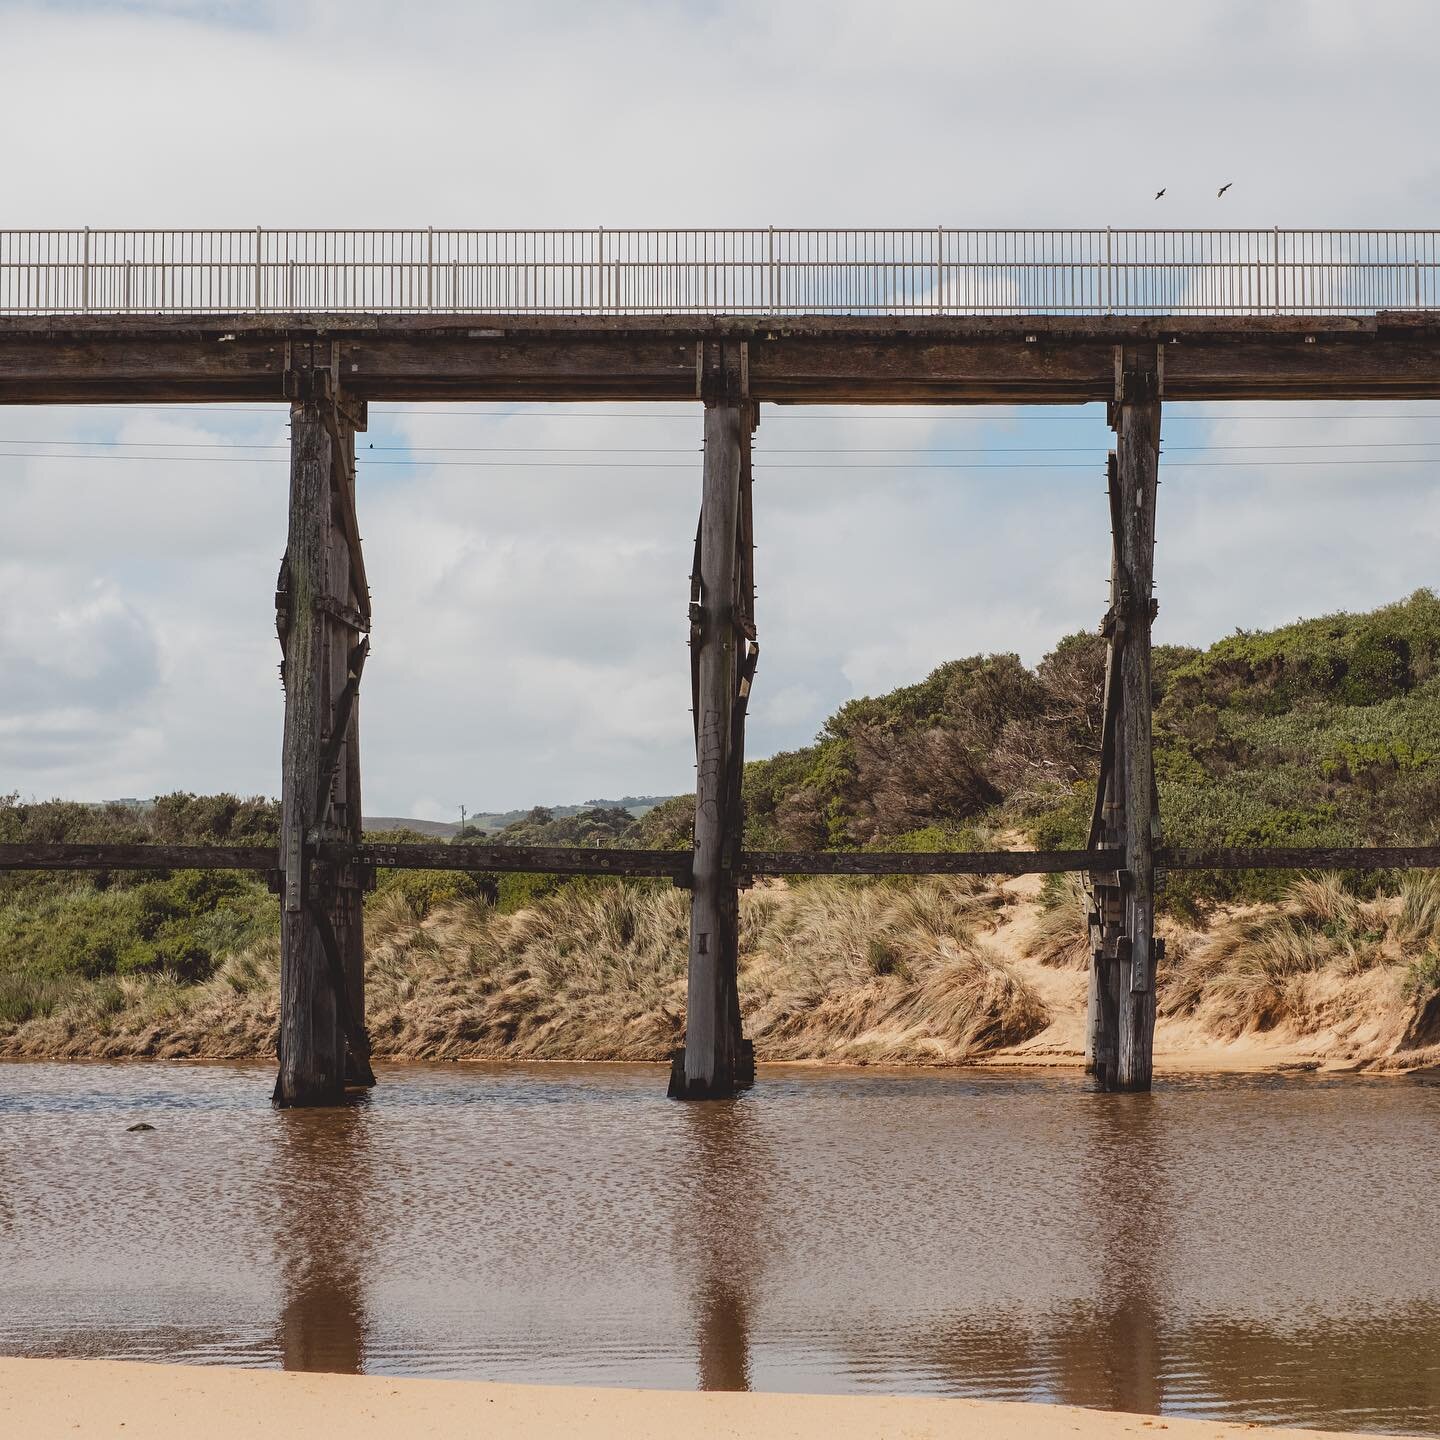 The iconic Kilcunda Trestle Bridge has welcomed lots of visitors this season. We love having such a beautiful structure a short stroll away. 📷 @theset.au @copperdoorstudio 
.
.
.
.
#thestickskilcunda #kilcunda #bunarong #boonwurrungcountry #ohdearth